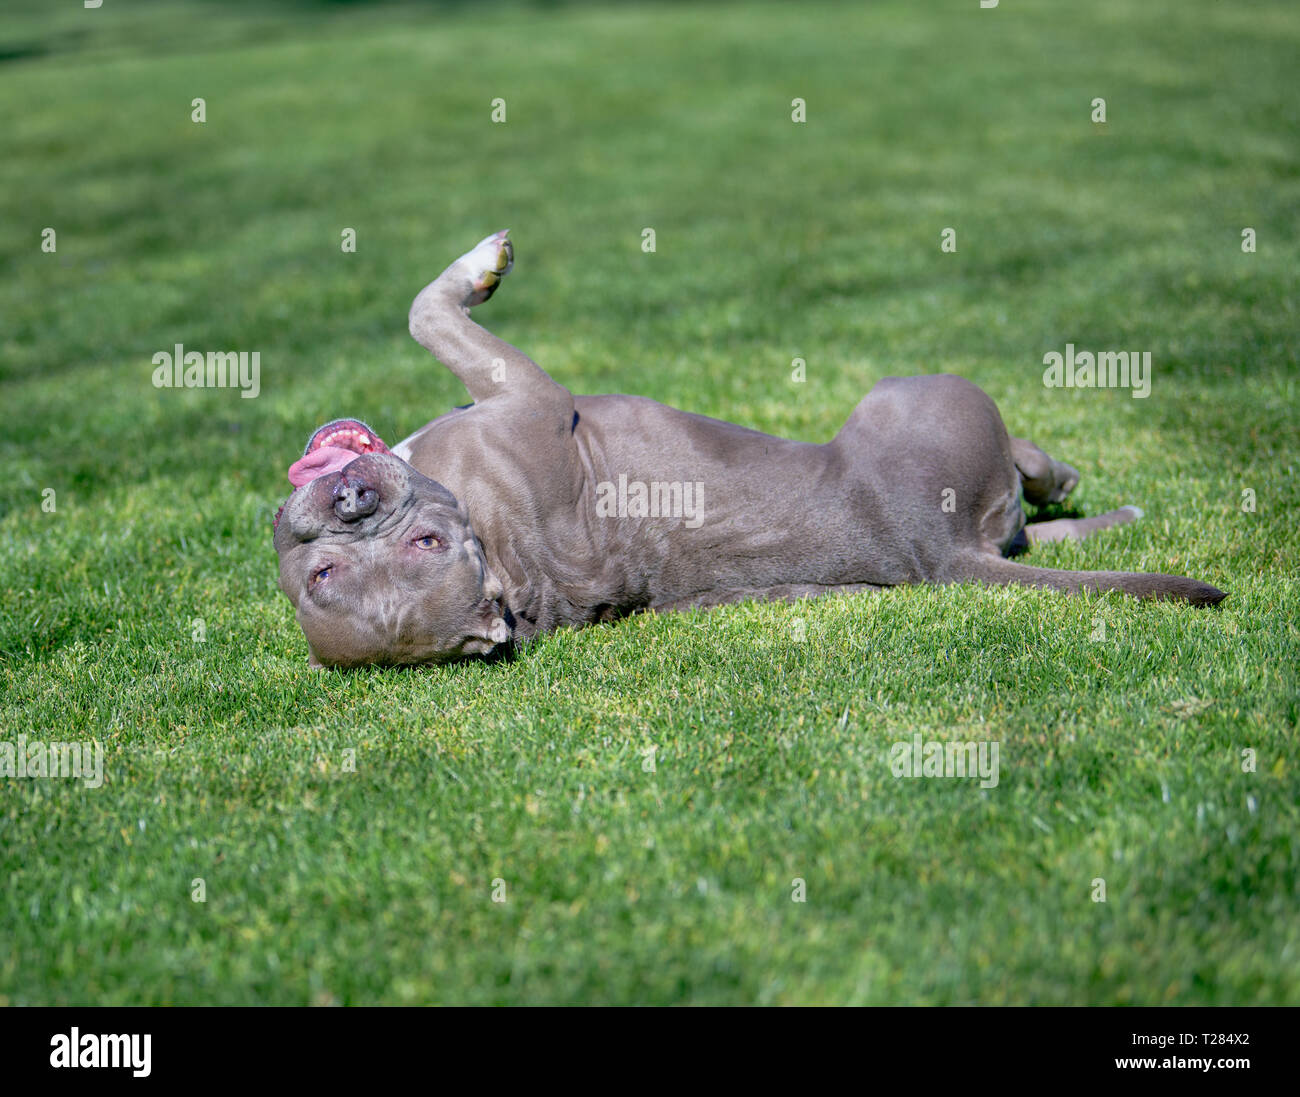 Pitbull dog enjoying a day at the park in the grass Stock Photo